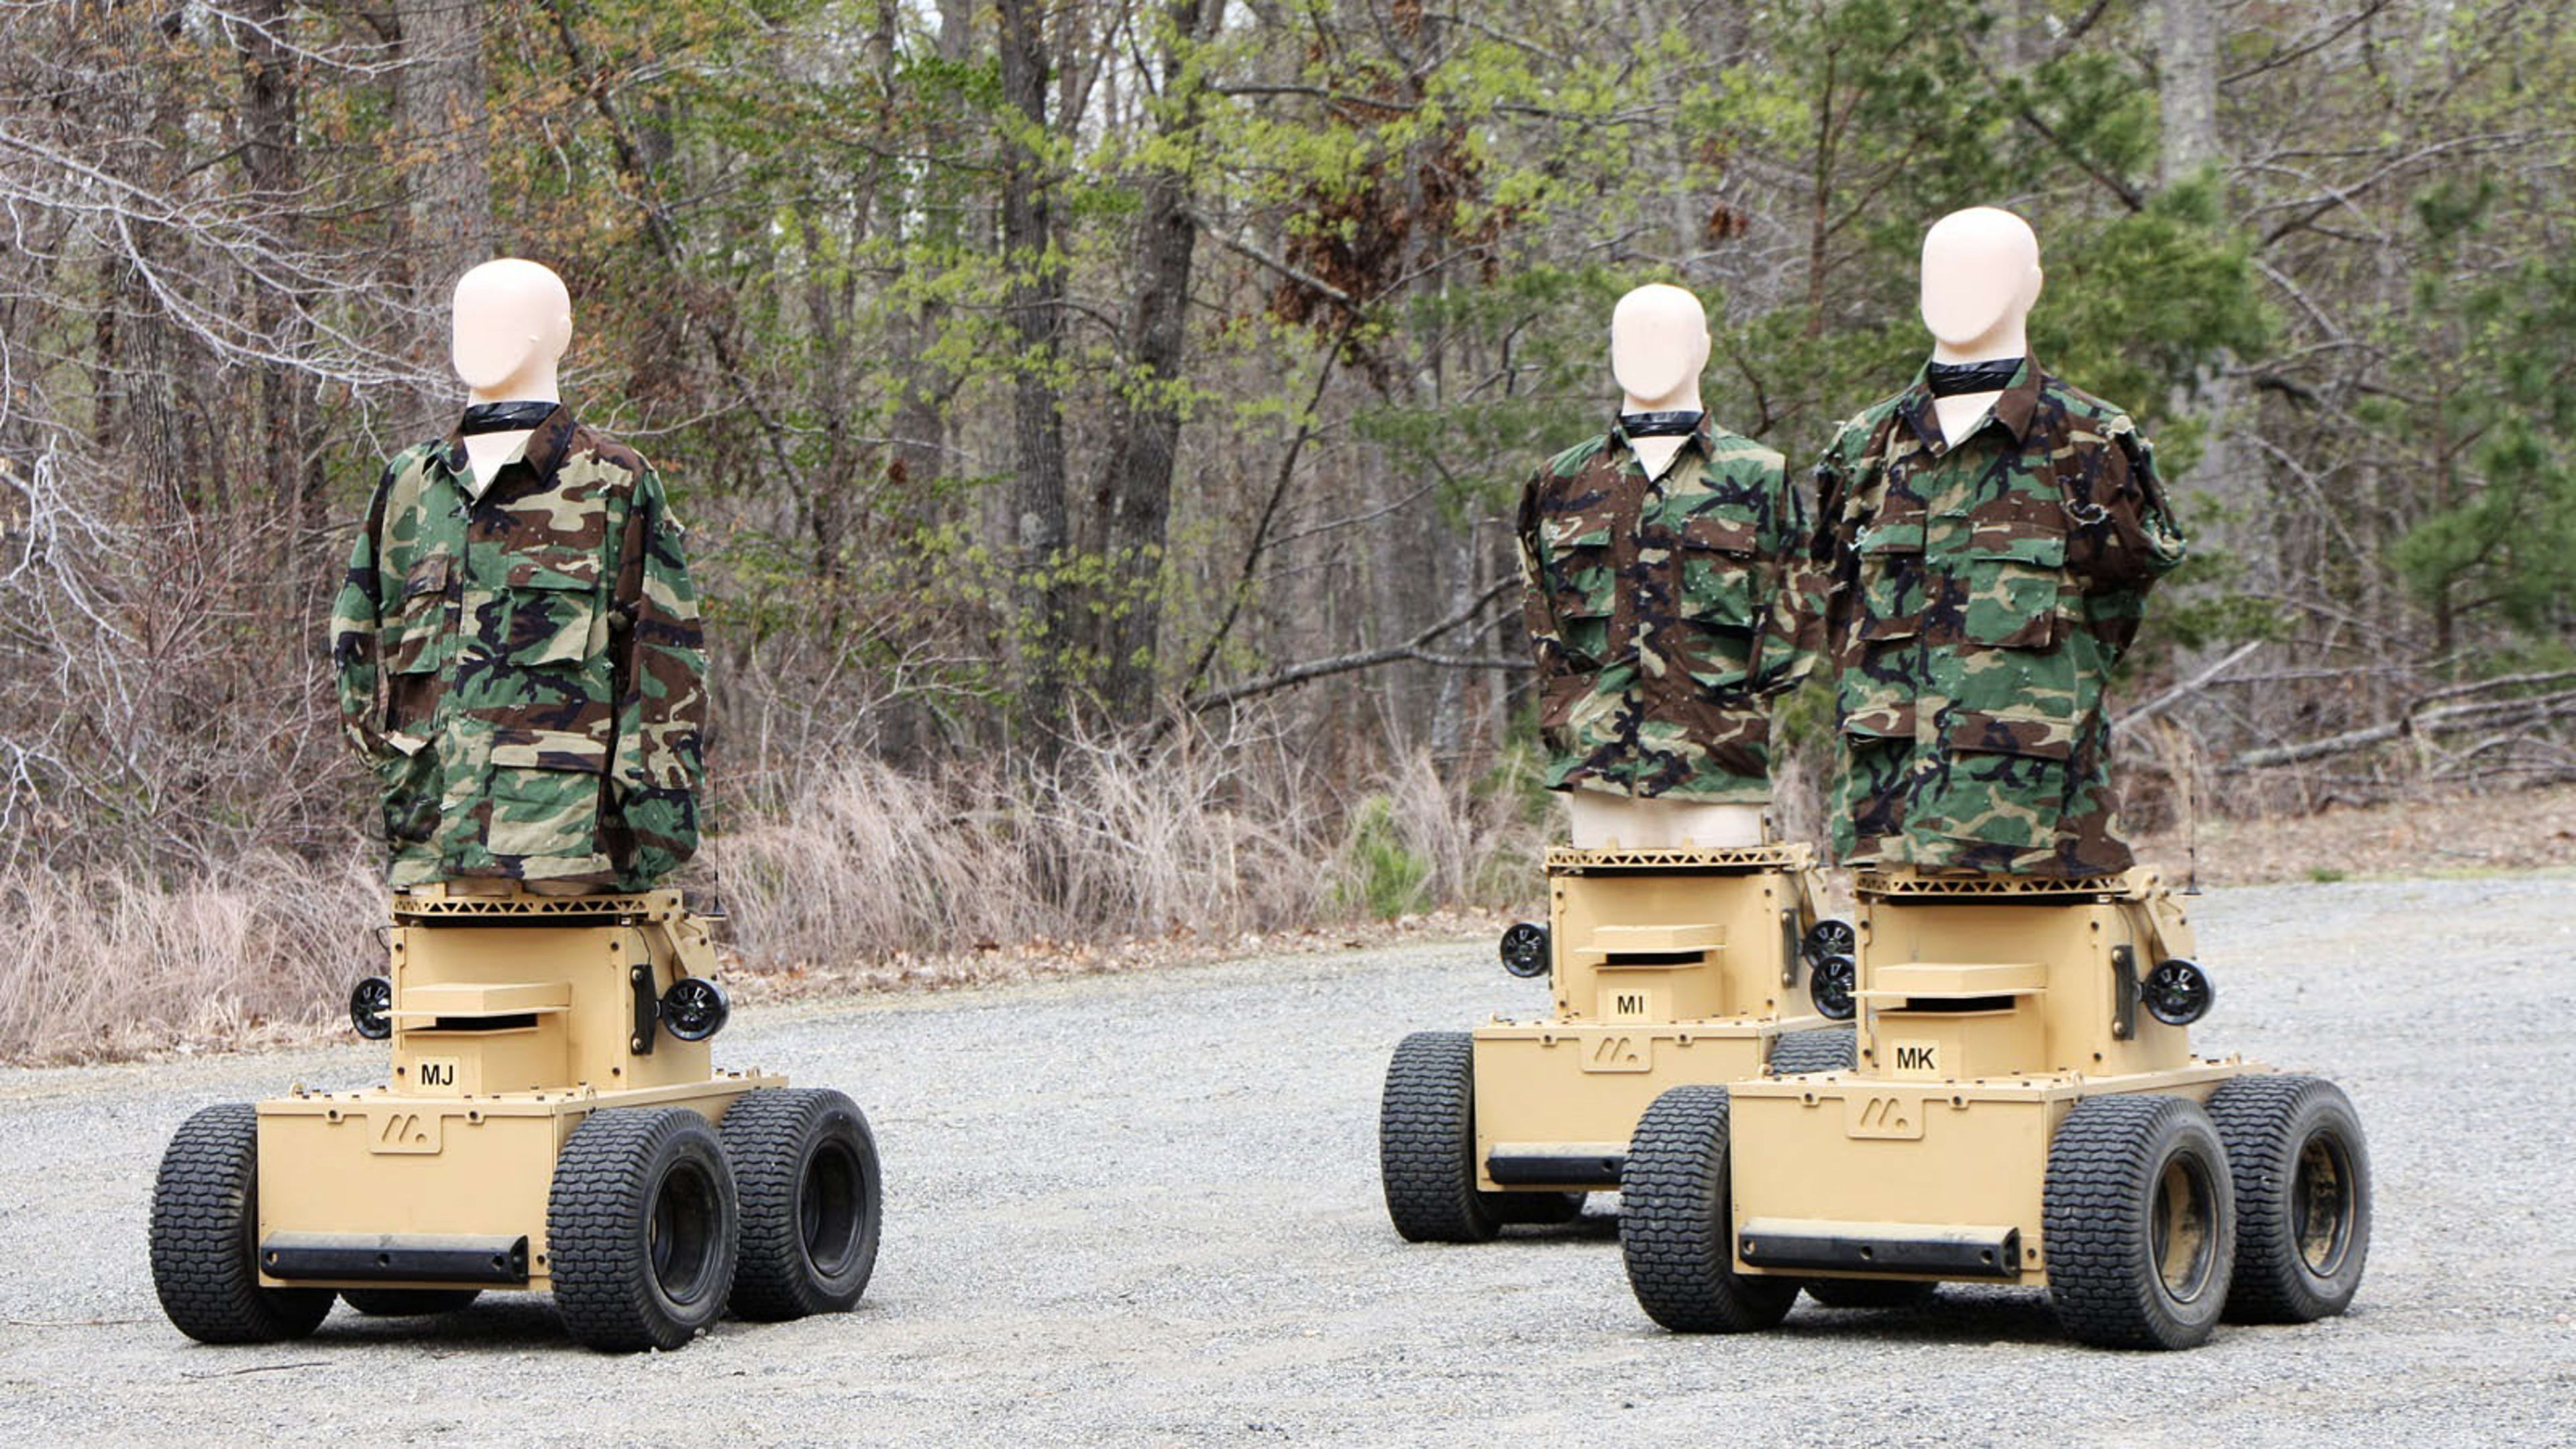 Terminators? Why the U.S. Marines have started shooting at robots